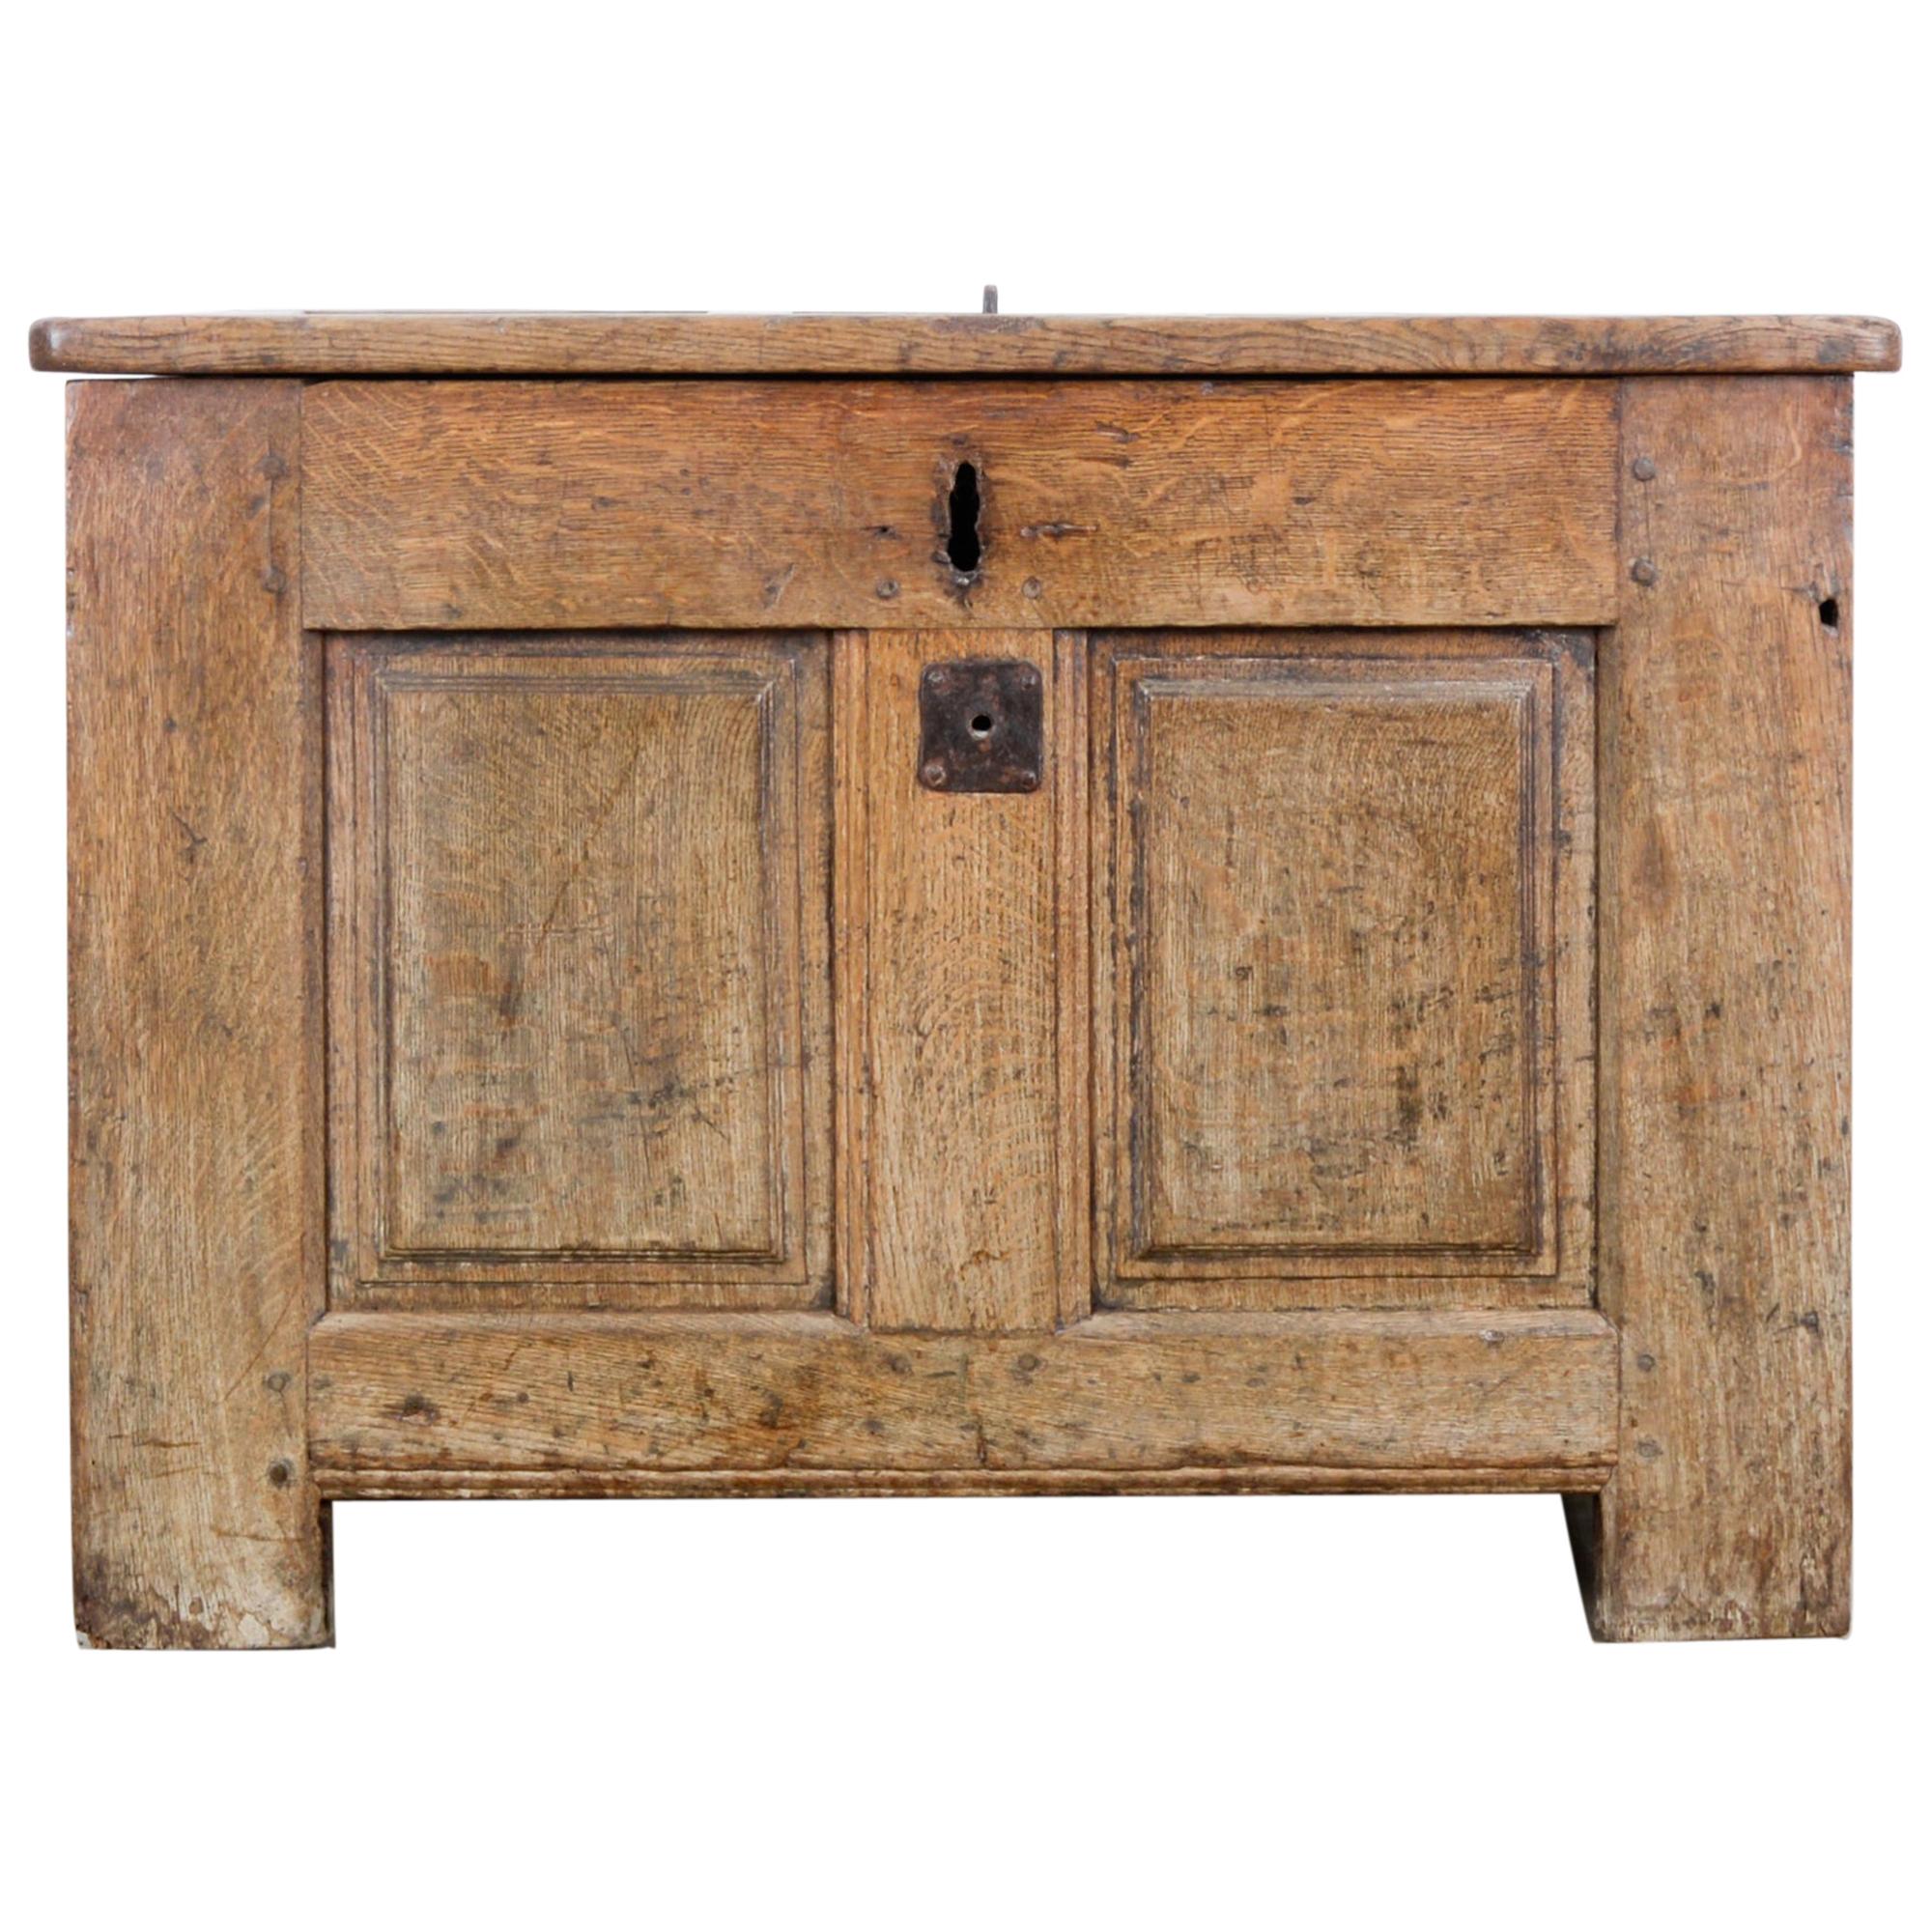 Early 19th Century French Wooden Trunk